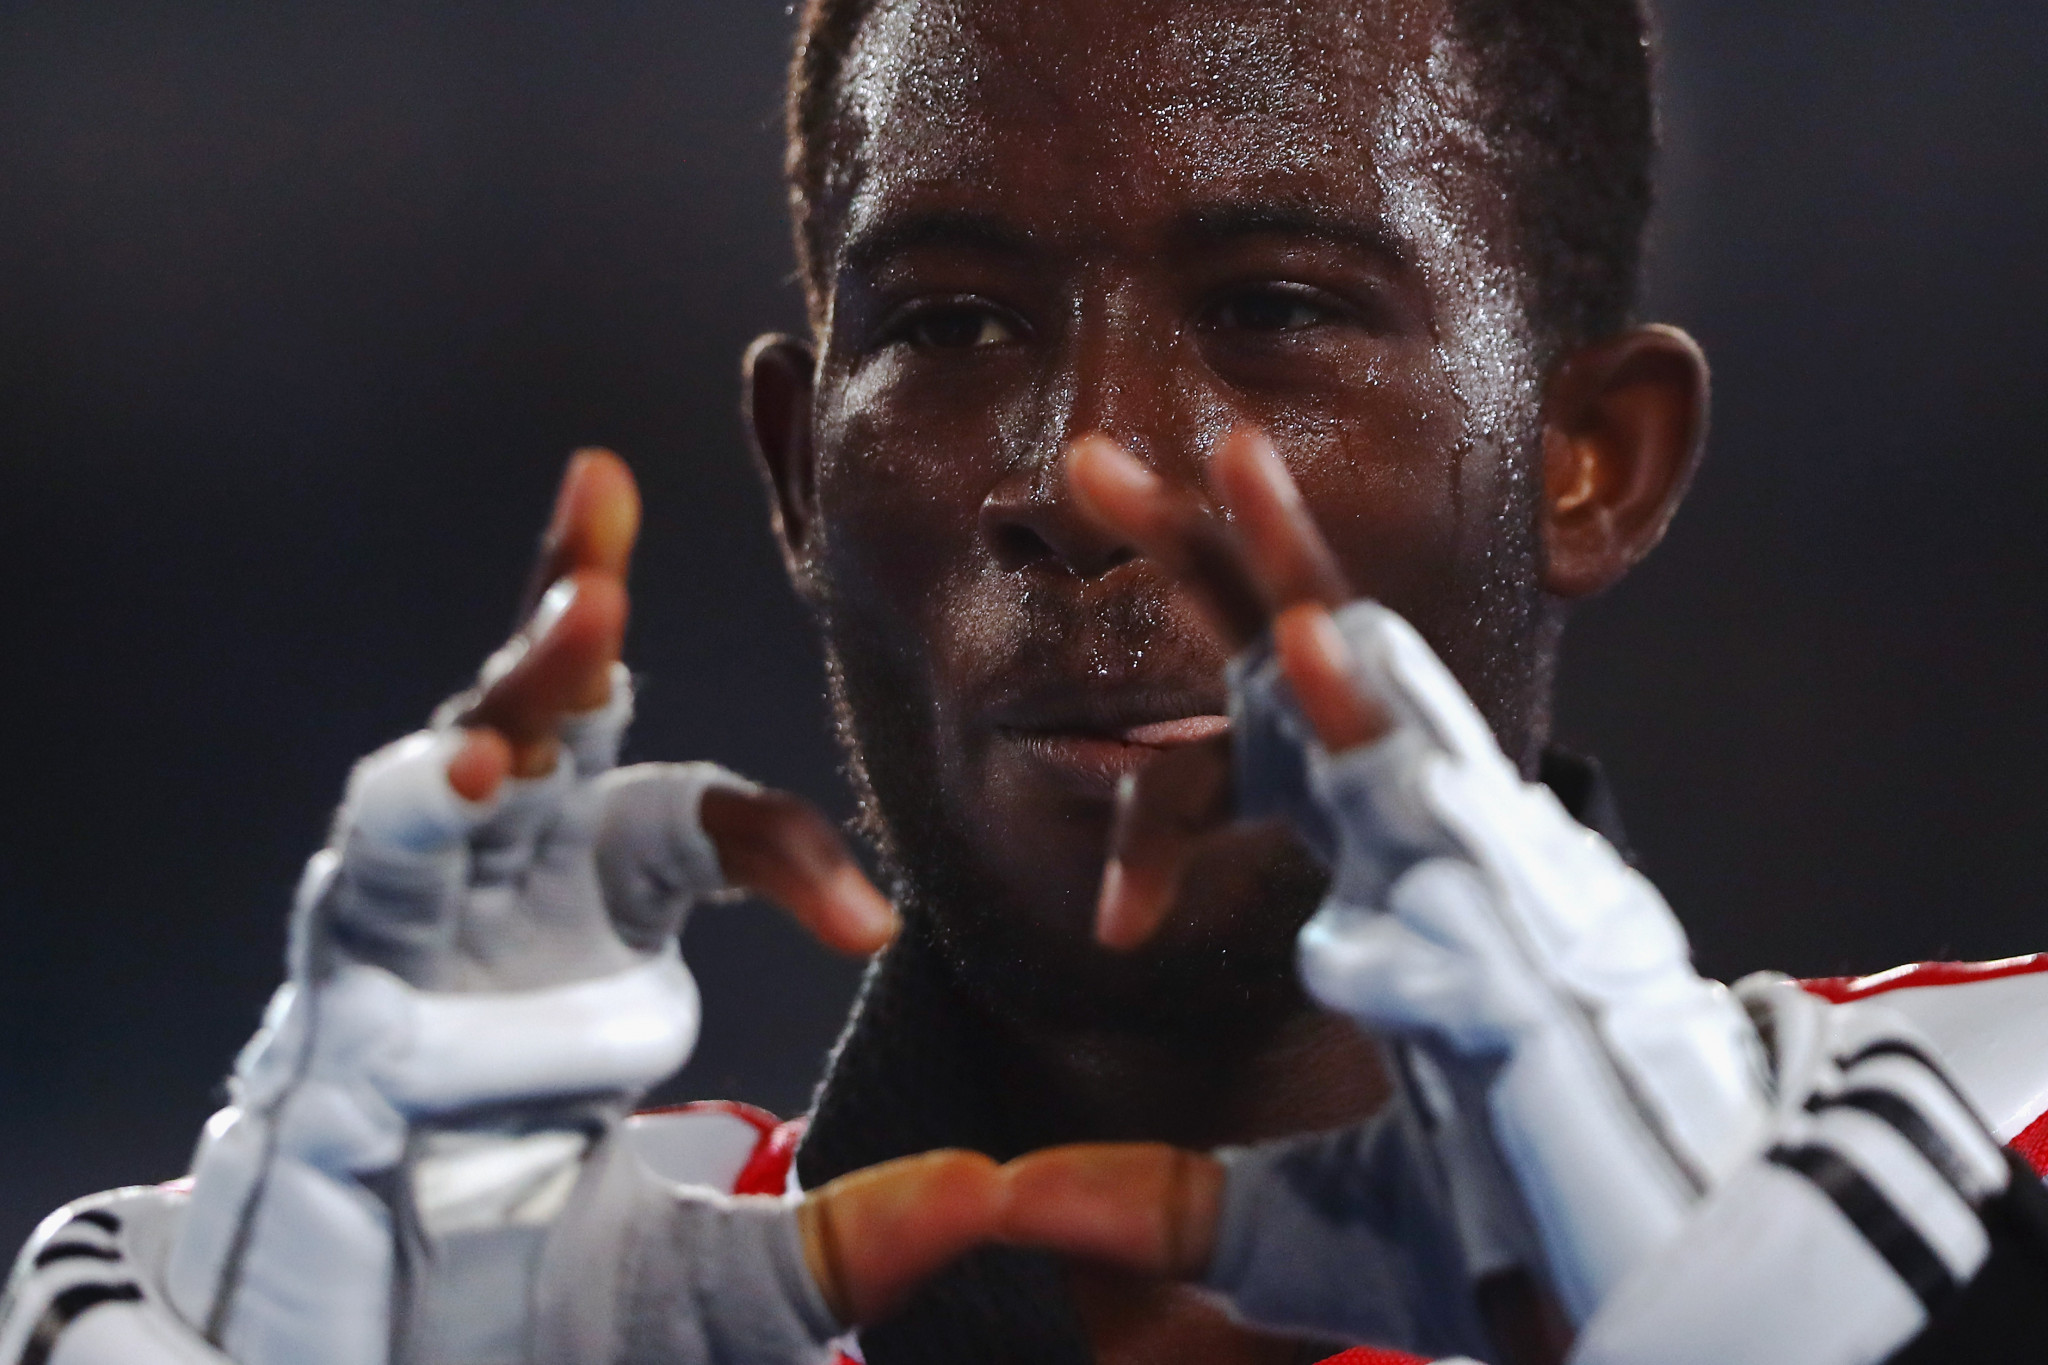 Taekwondo champion Cheick Sallah Cissé continues to dominate the sport ©Getty Images